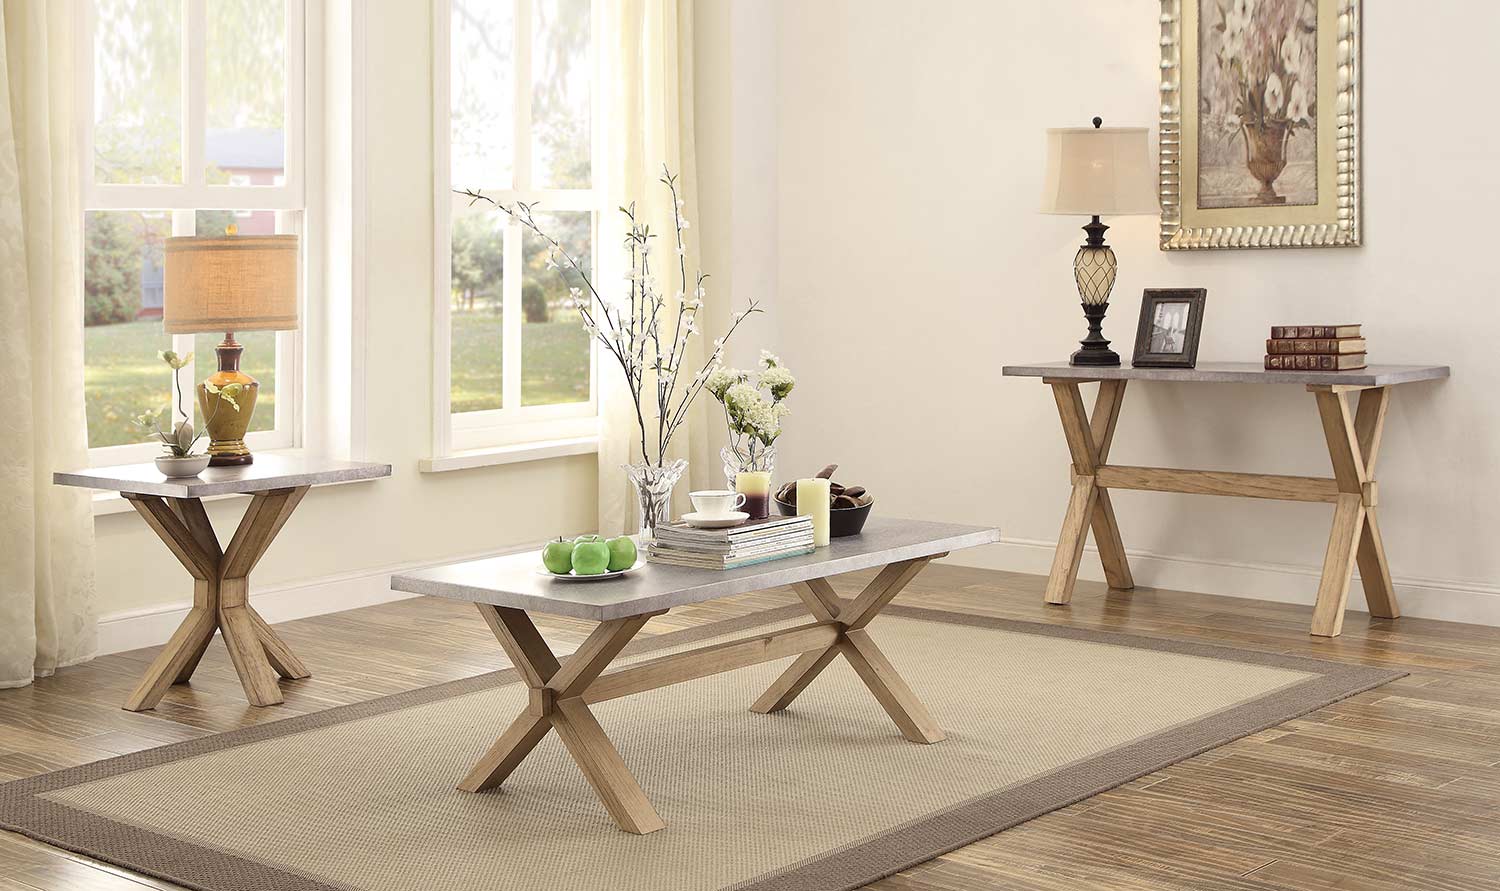 Homelegance Luella Coffee Table Set - Weathered Oak with Zinc Table Top